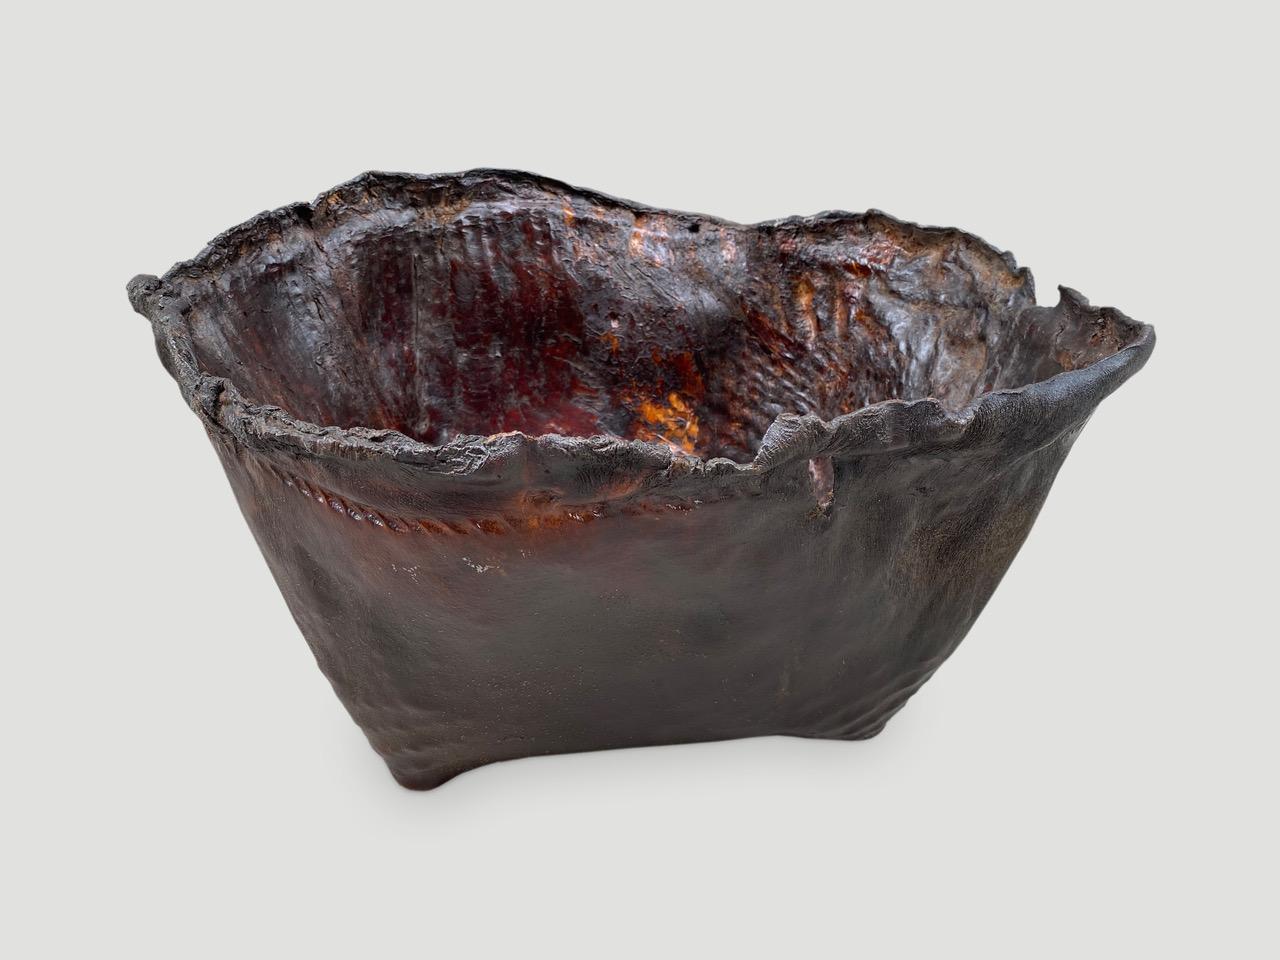 Antique container from Borneo made from aged buffalo hide with a natural organic live edge rim. We discovered a beautiful patina after polishing. Great for holding magazines, towels, or simply as a piece of art. We have a collection as shown in the